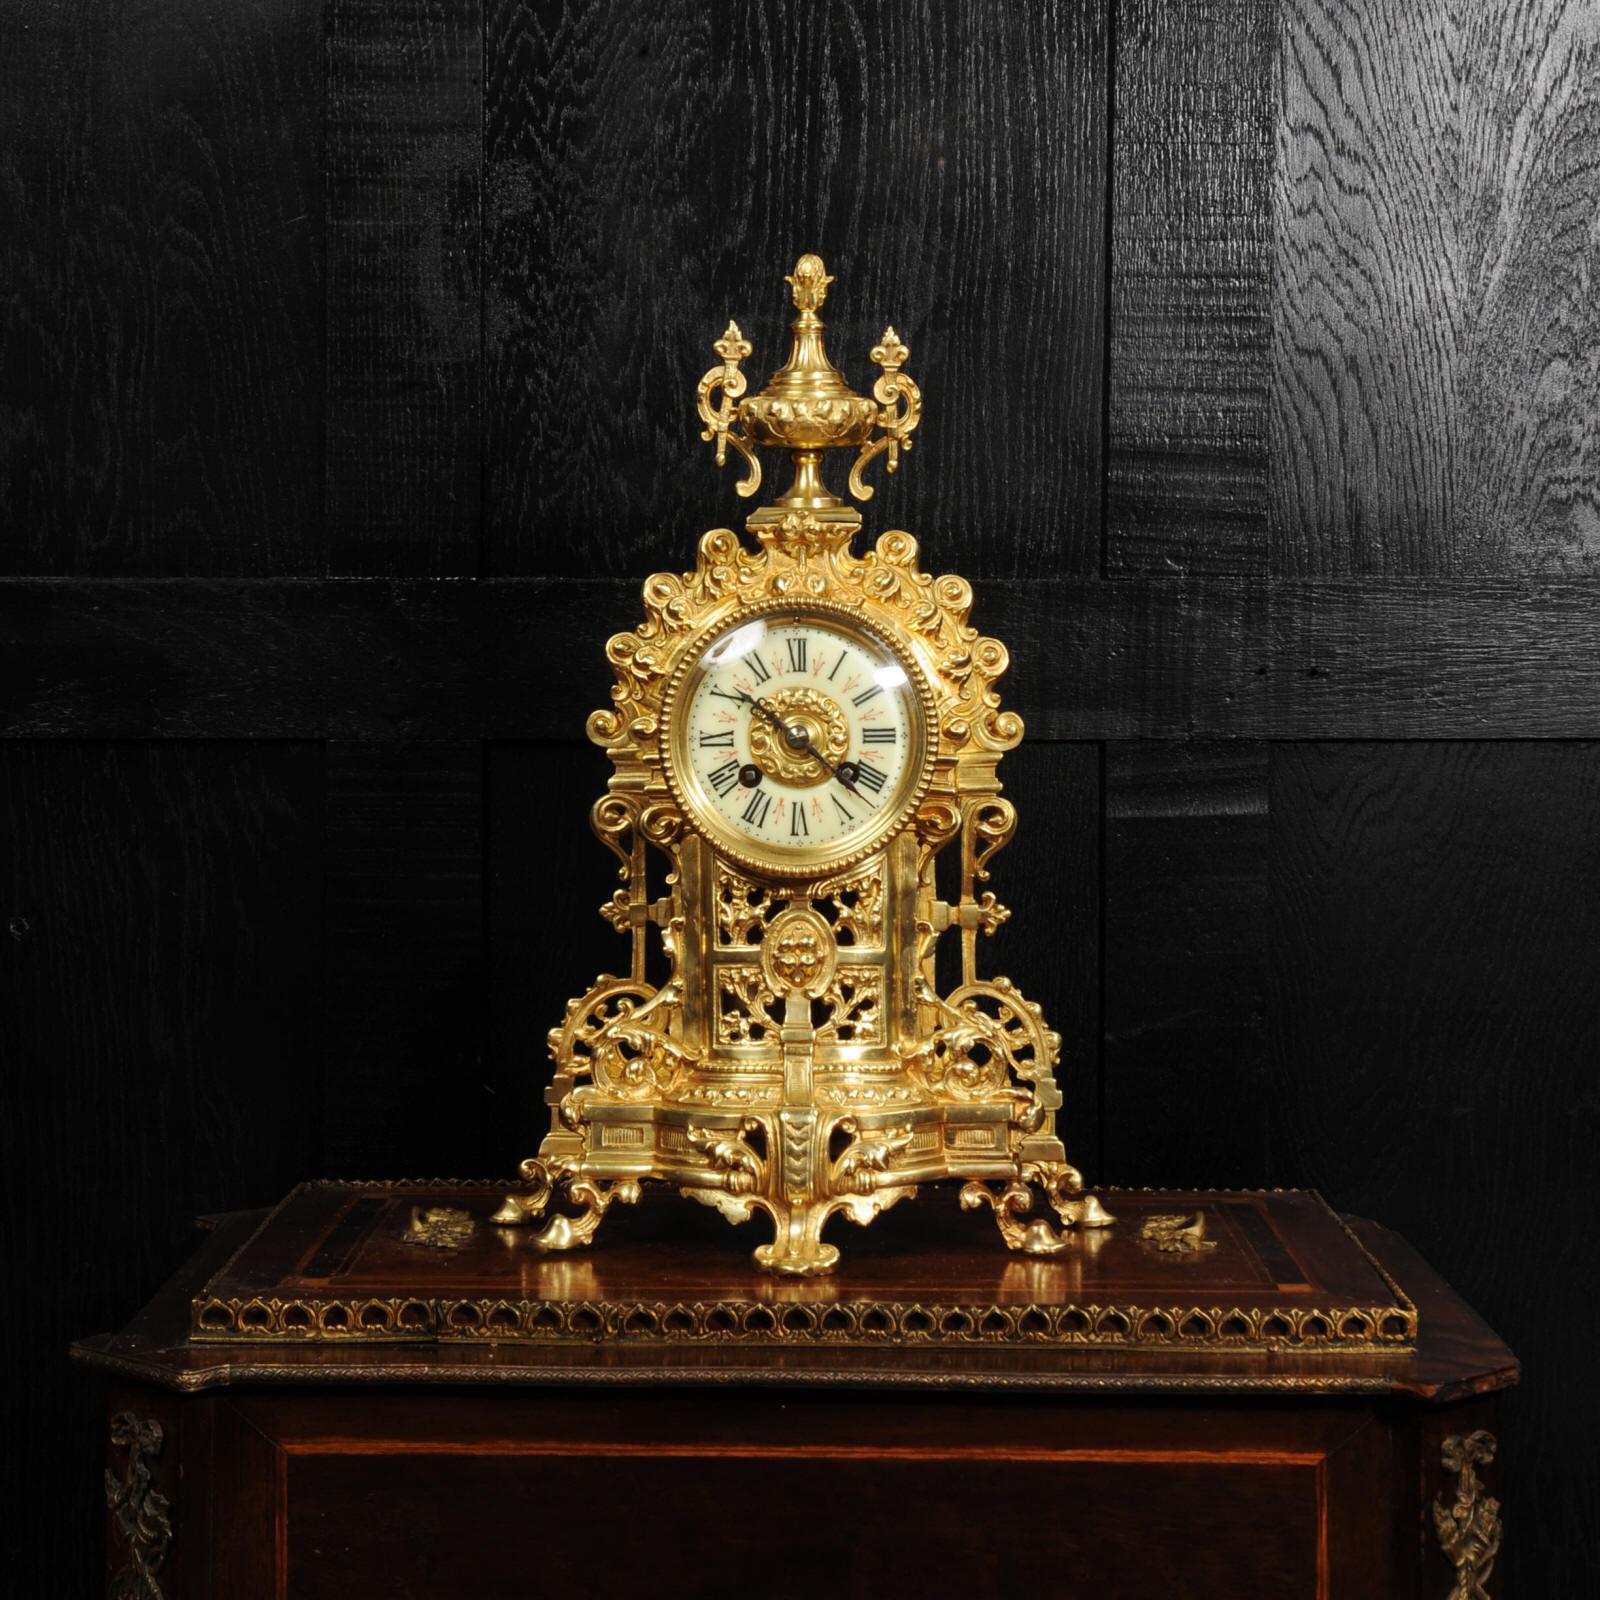 A beautiful antique French gilt bronze clock by A. D. Mougin.  Modelled in architectural form and covered with scrolling acanthus decoration to represent a romantic ruin. To the top is an urn with pineapple finial and handles formed as torches